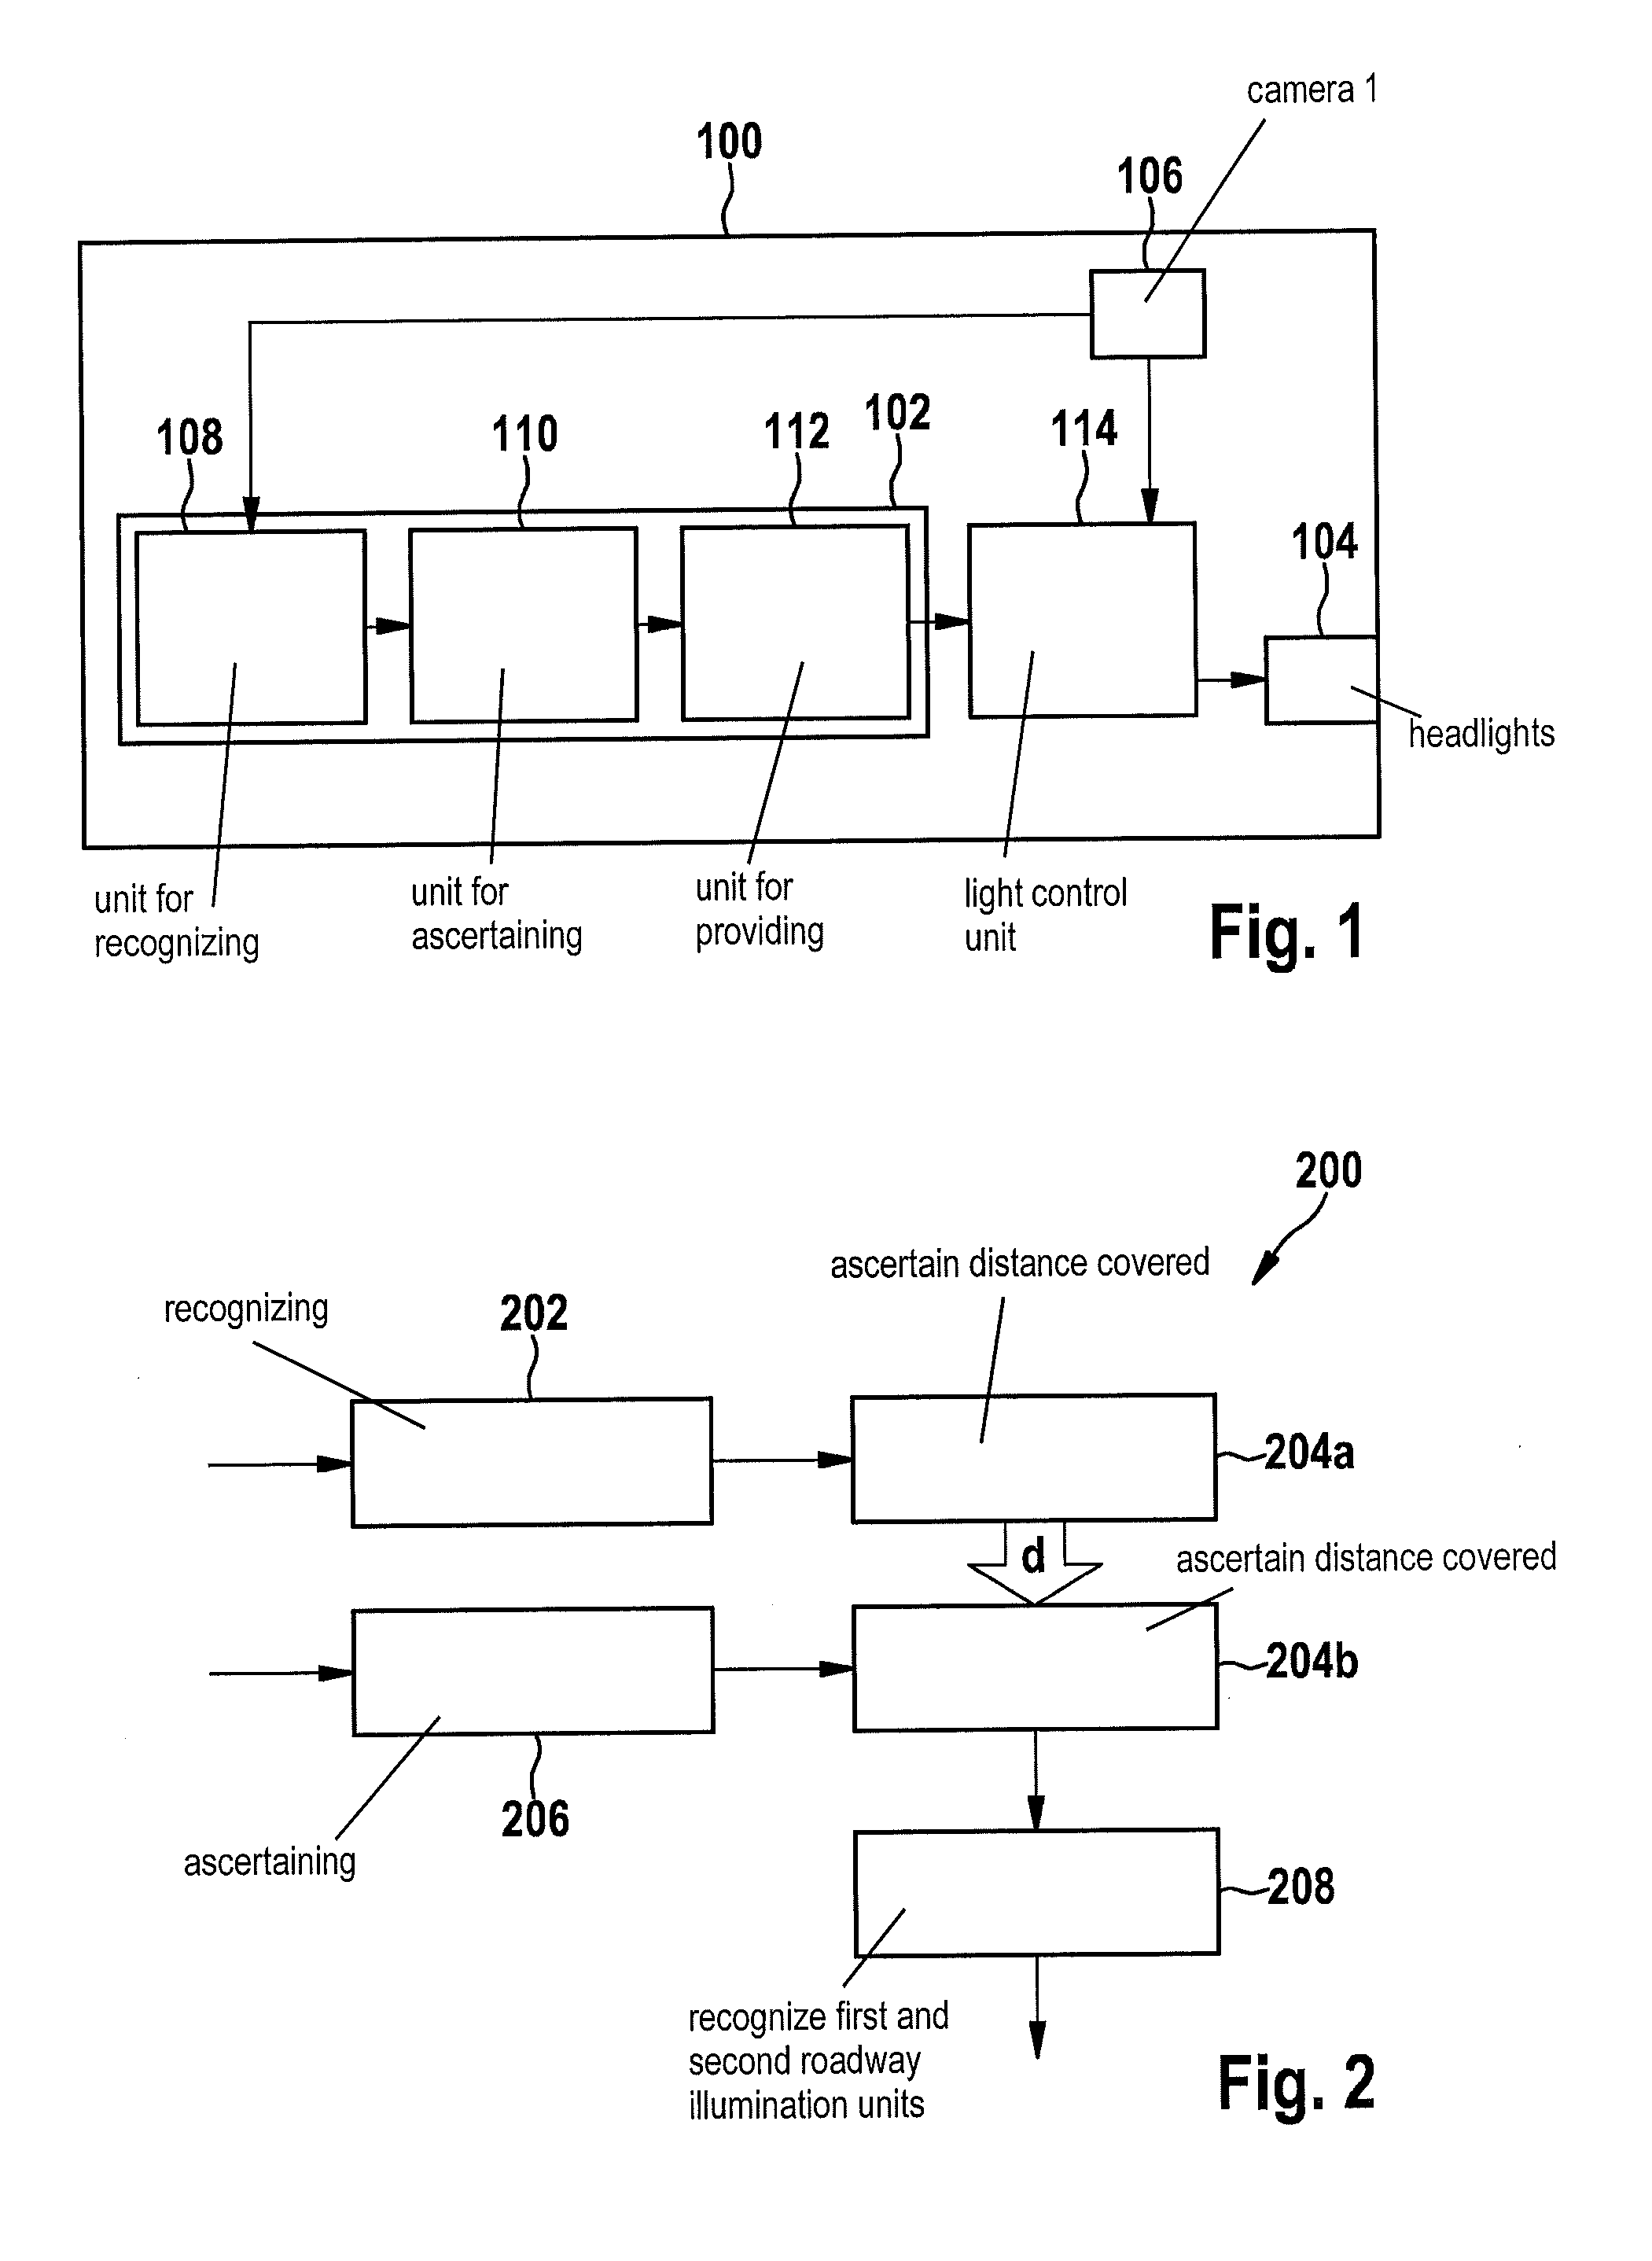 Method and device for recognizing an illuminated roadway ahead of a vehicle